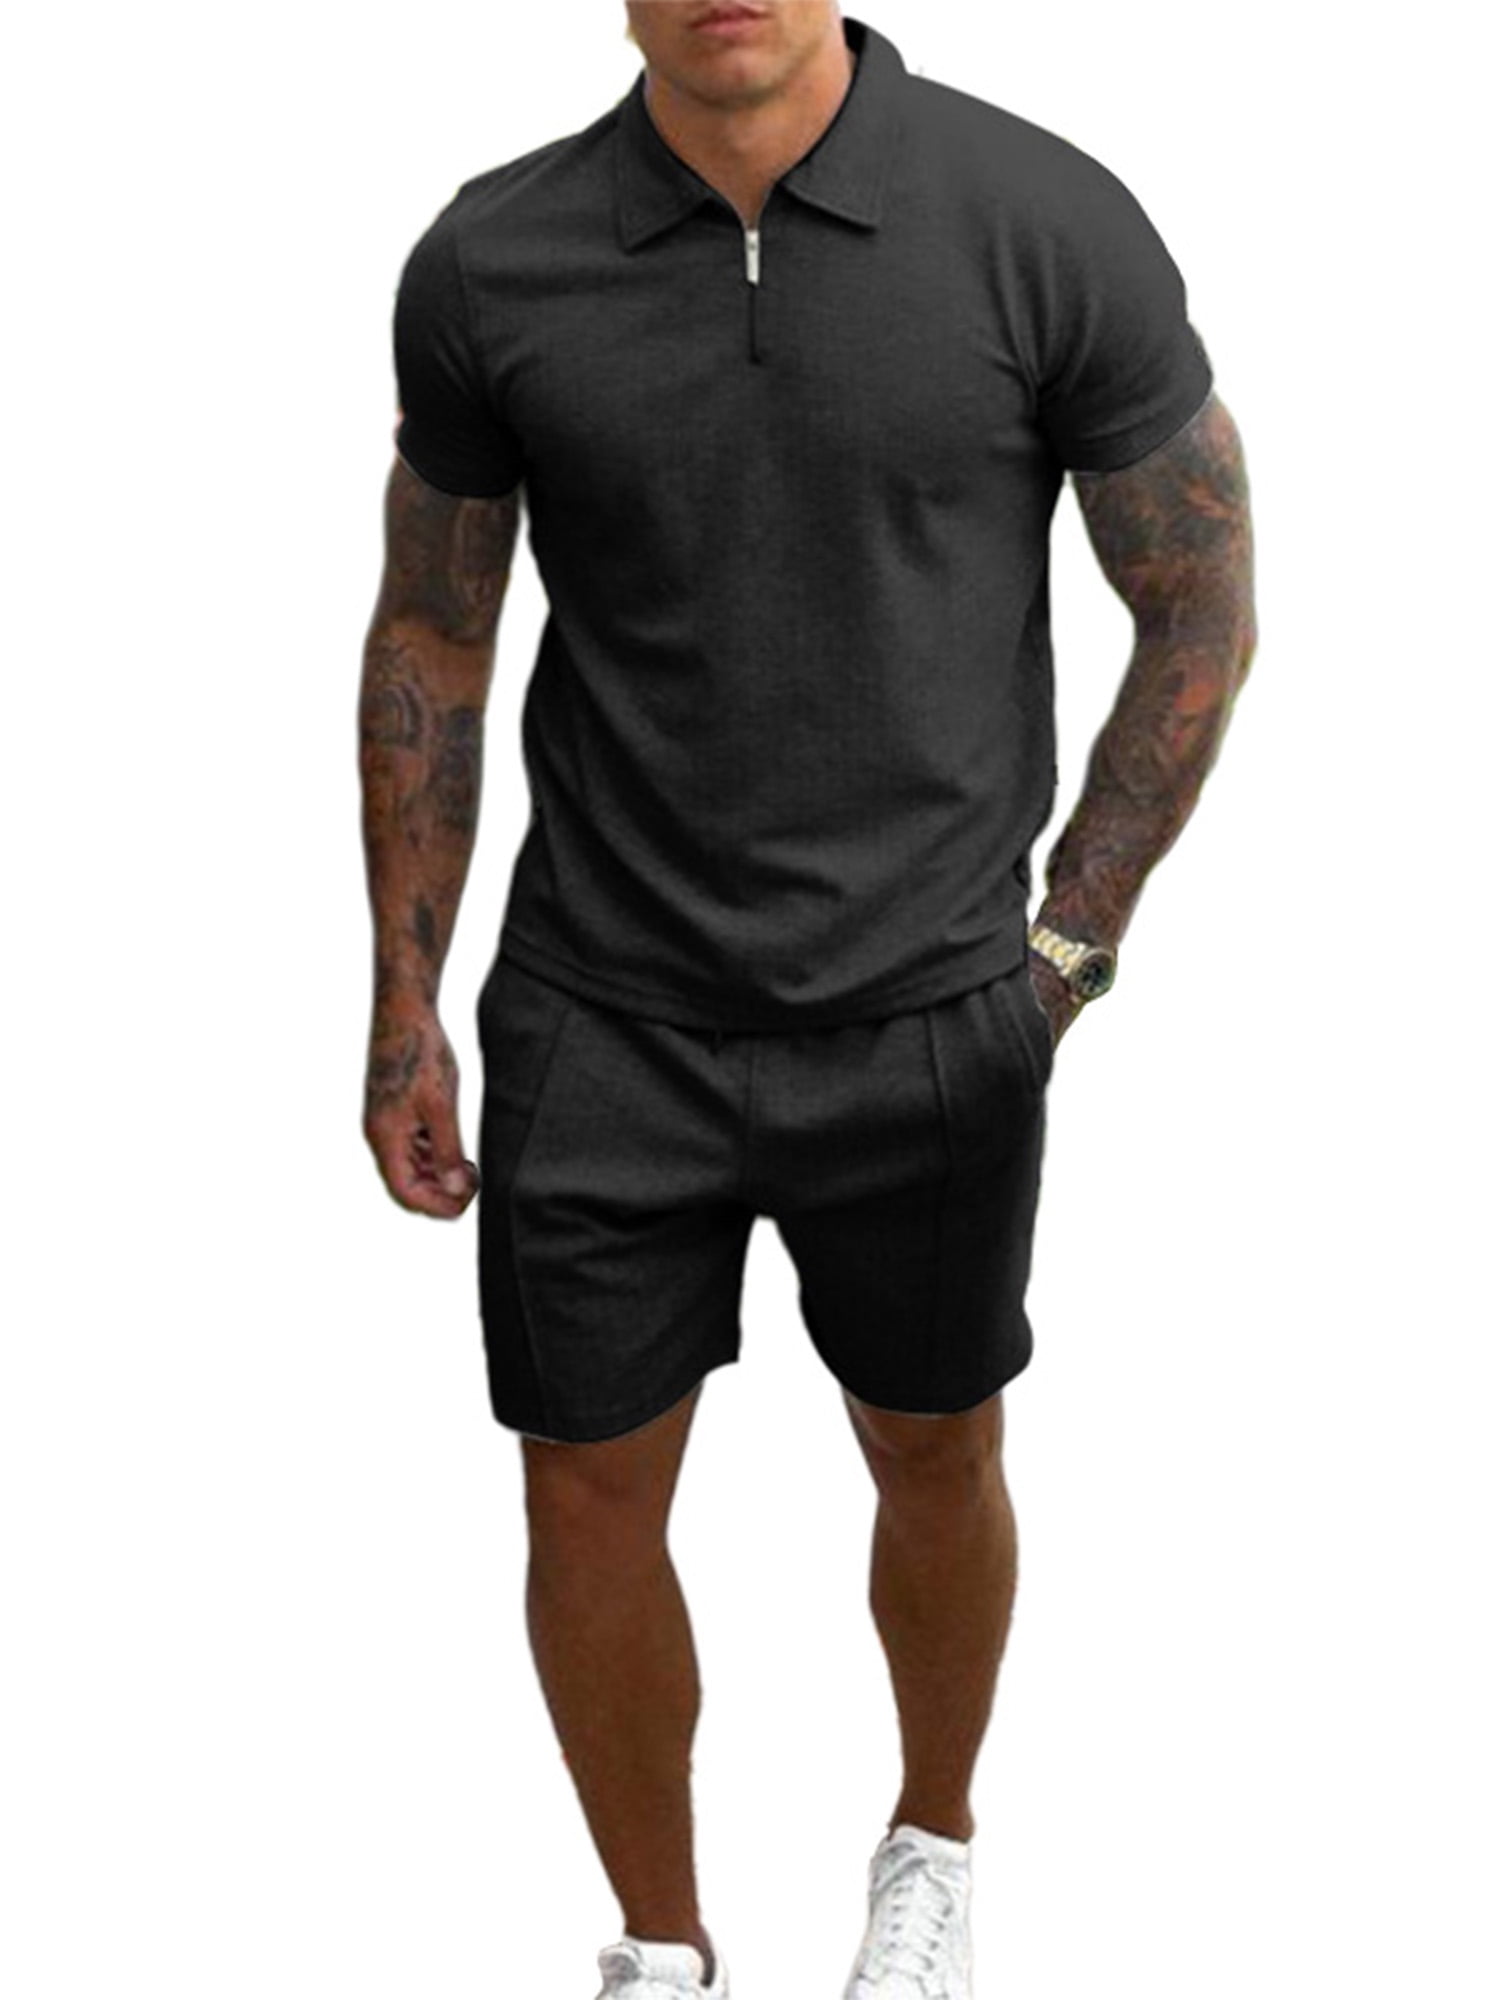 MmNote Fierce Lion Screaming Print Moisture Wicking Performance Training Athletic Summer Short Sleeve T-Shirts for Men 